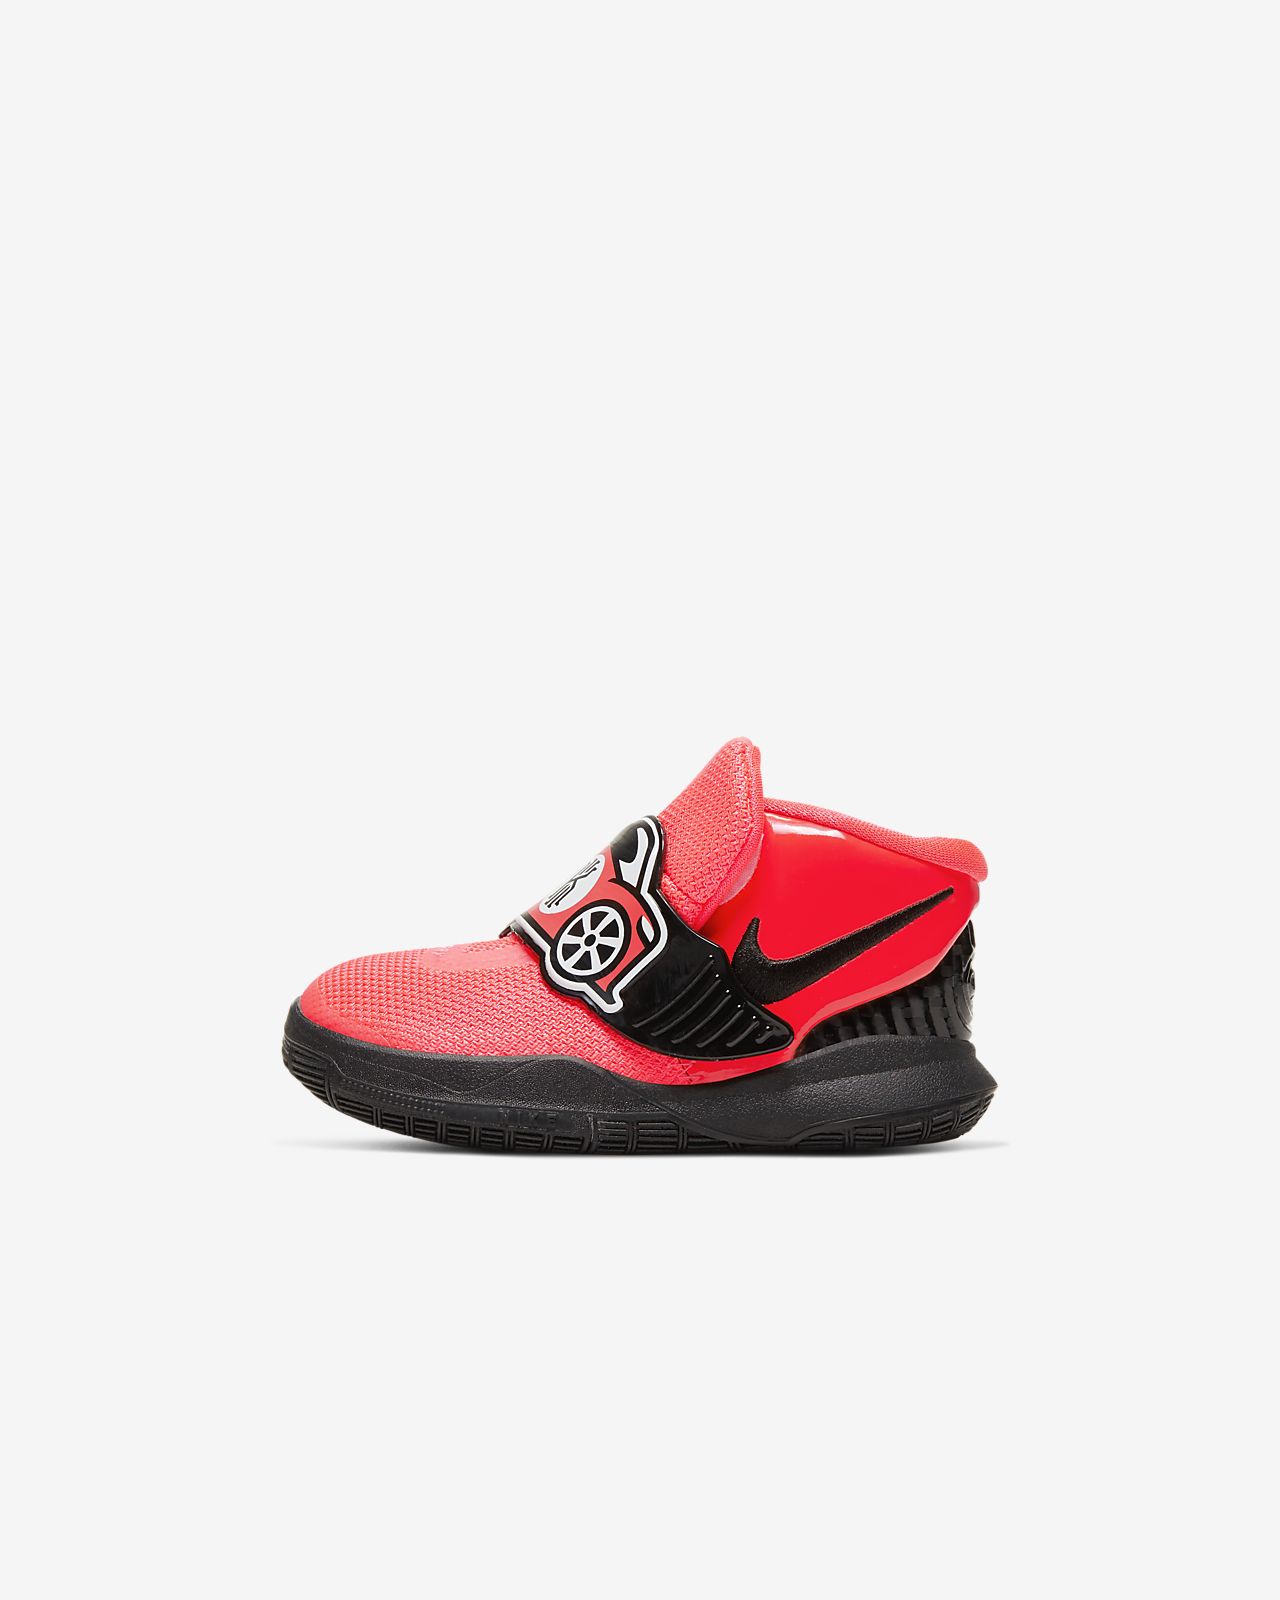 kyrie 4 toddler shoes